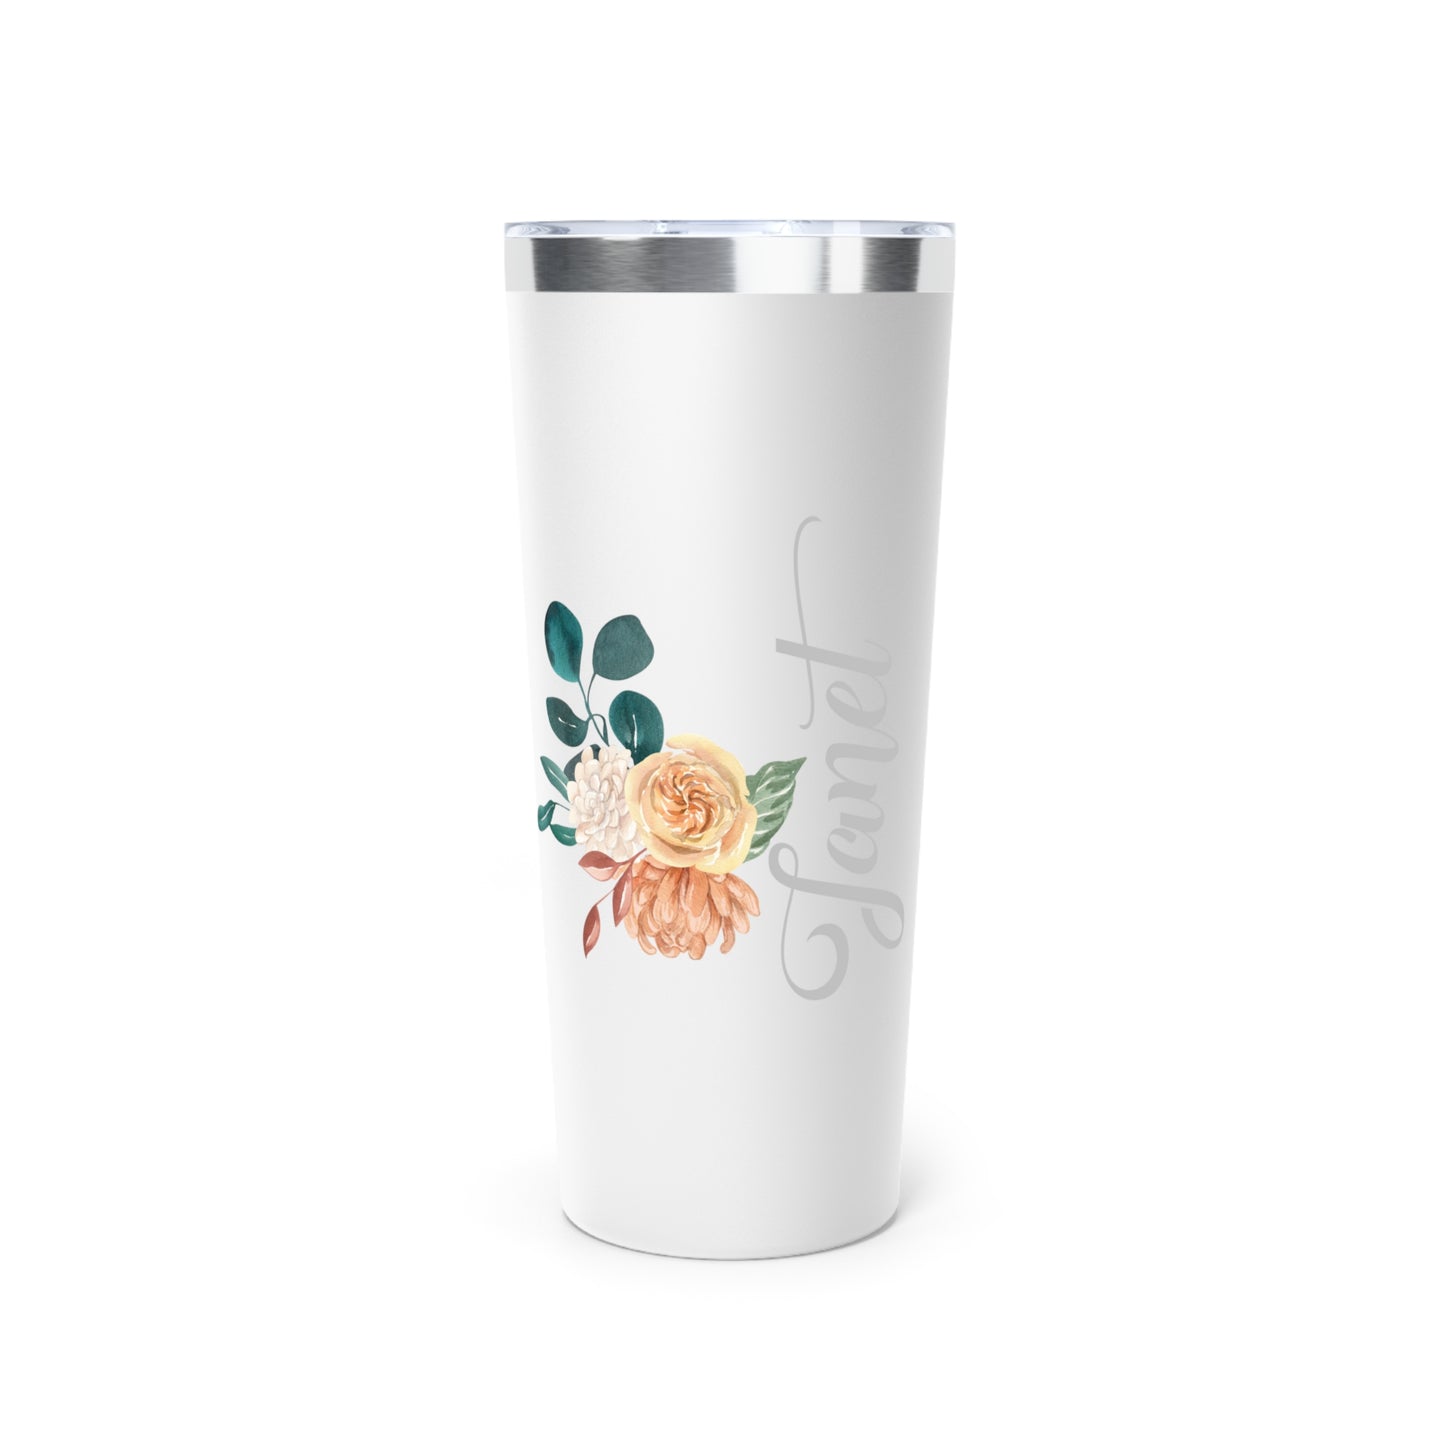 November Personalized Birth Flower Tumbler, Personalized Birth Flower Coffee Cup With Name, Gifts for Her, Bridesmaid Proposal, Party Favor